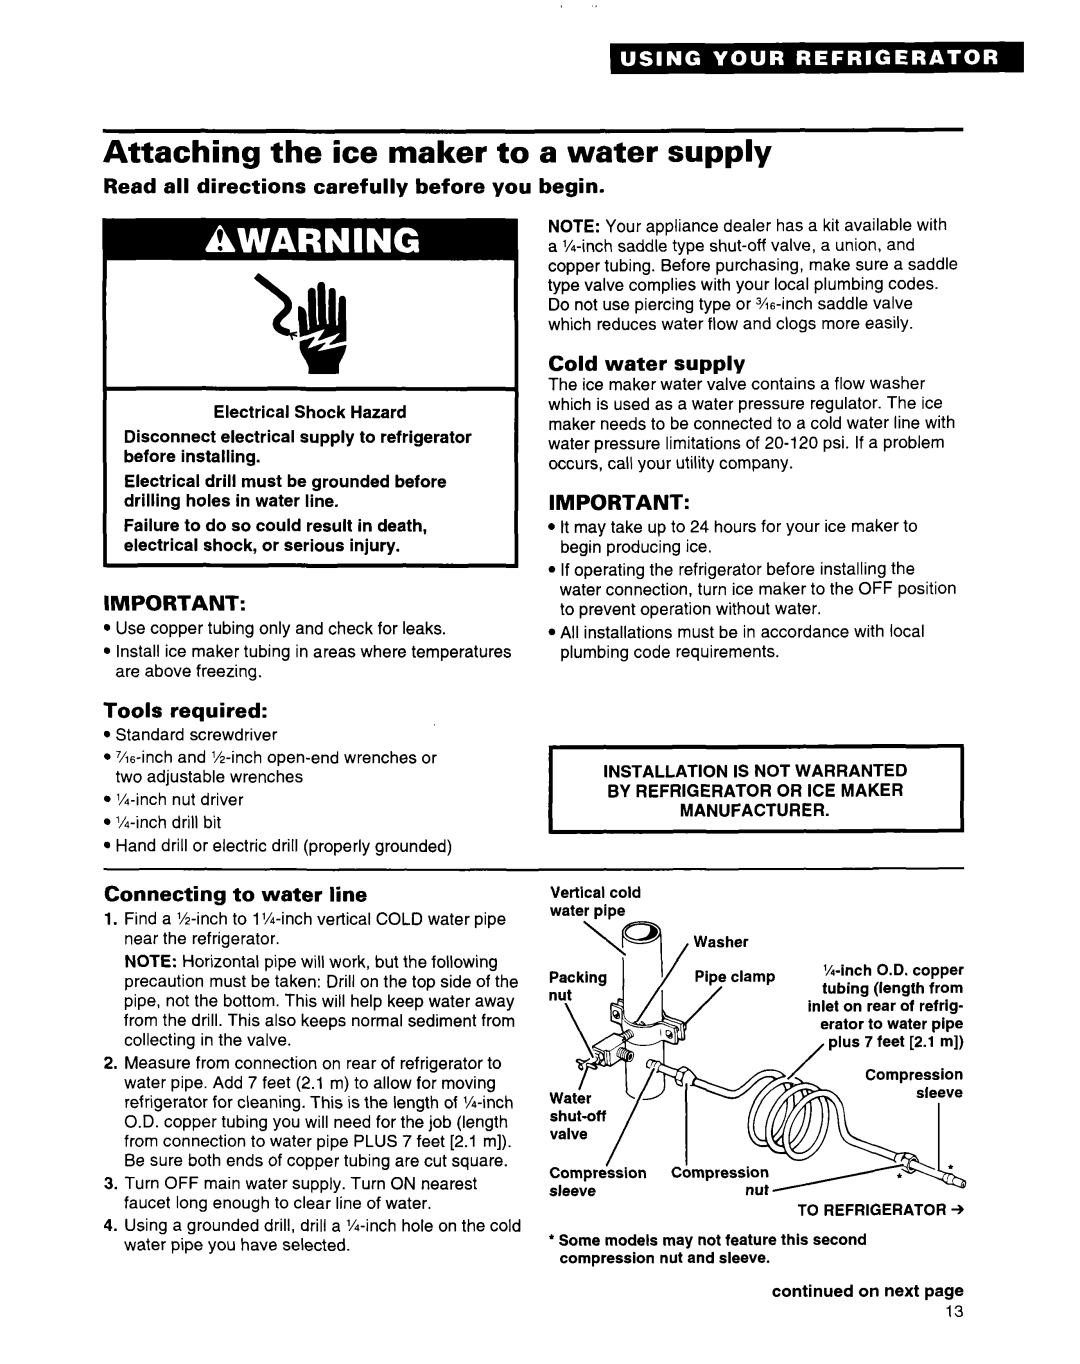 Whirlpool 2184589 warranty Attaching the ice maker to a water supply, Read all directions carefully before you begin 